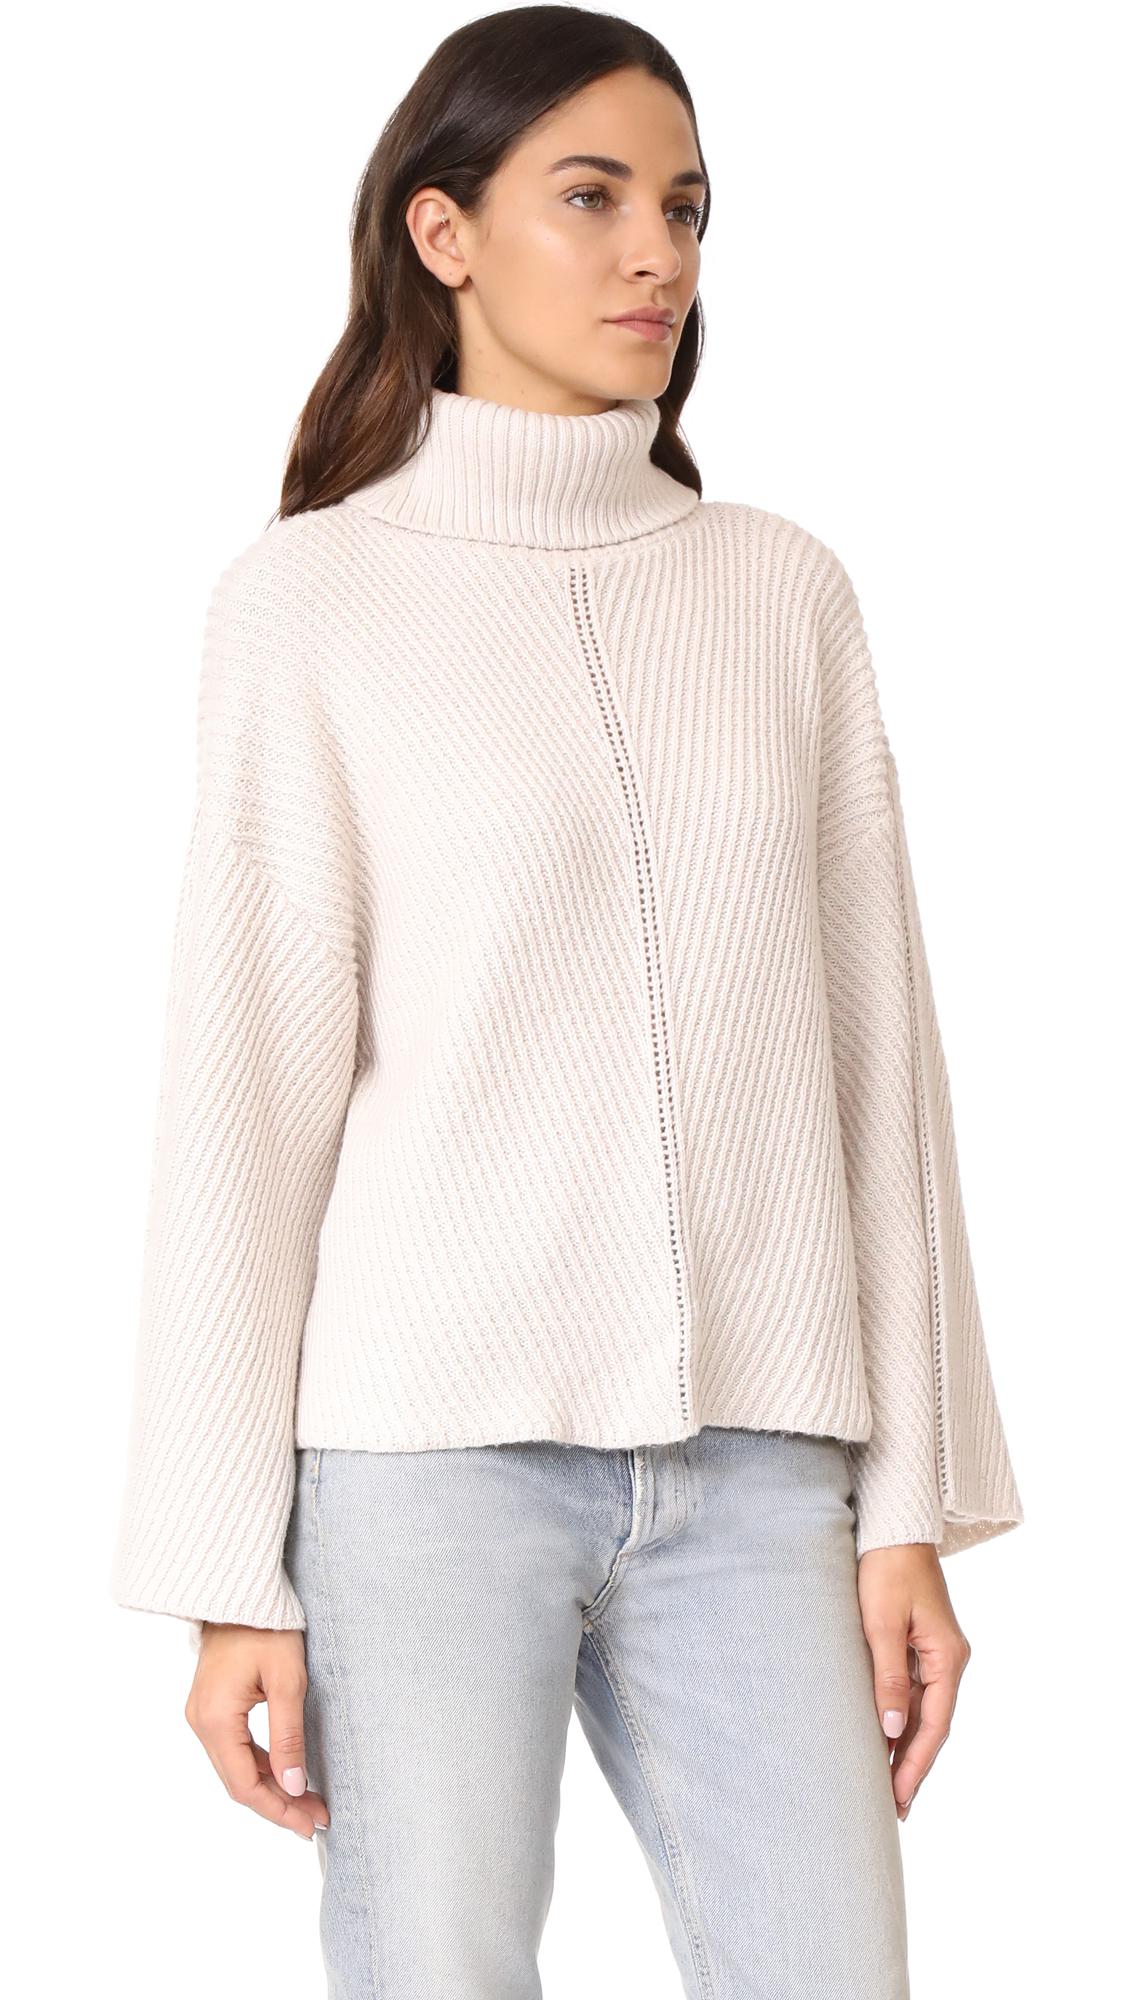 Lyst - Cupcakes And Cashmere Randy Cowl Neck Sweater